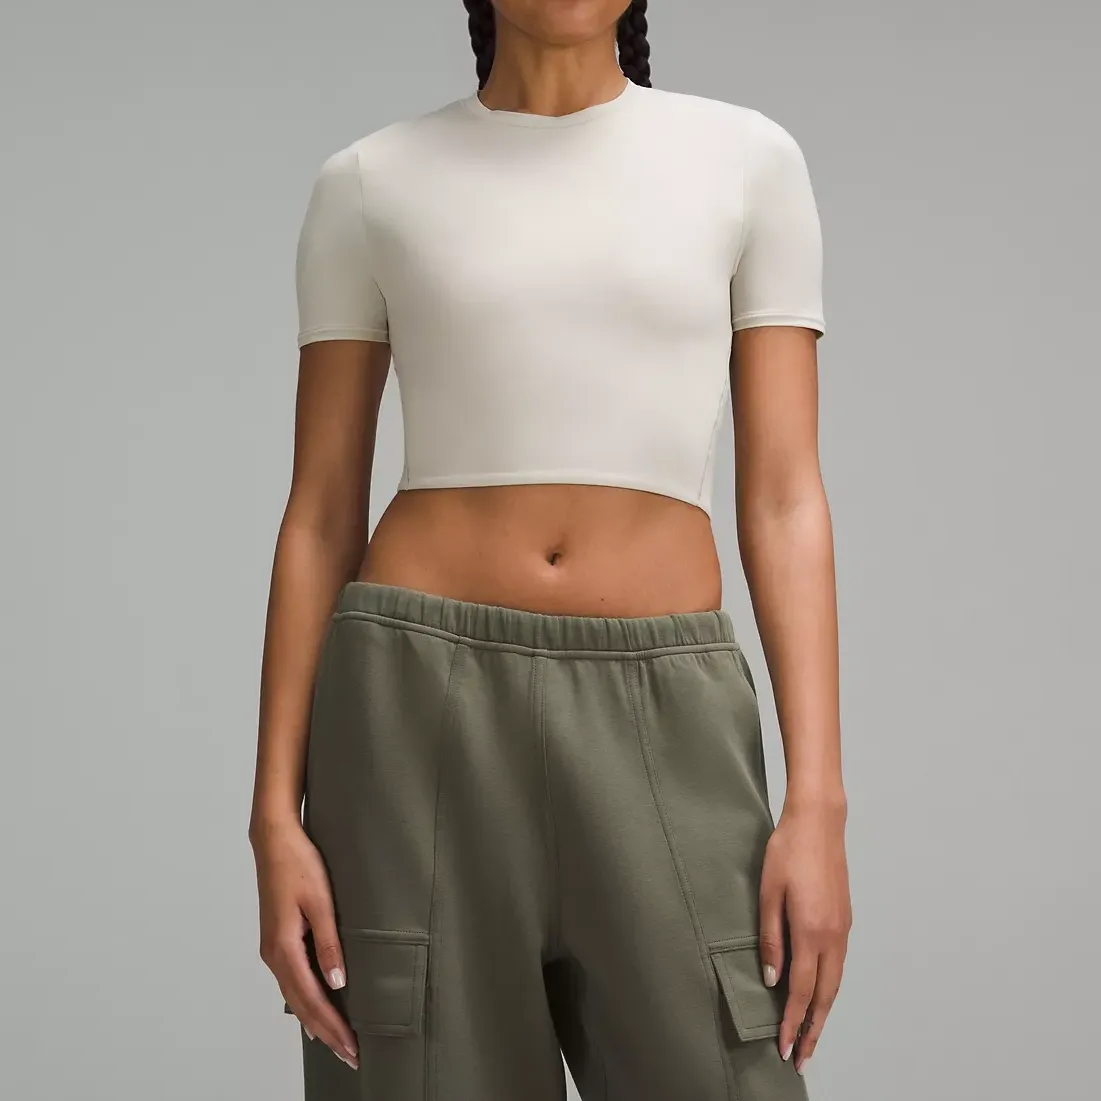 A woman is wearing a white crop top and olive green cargo pants.